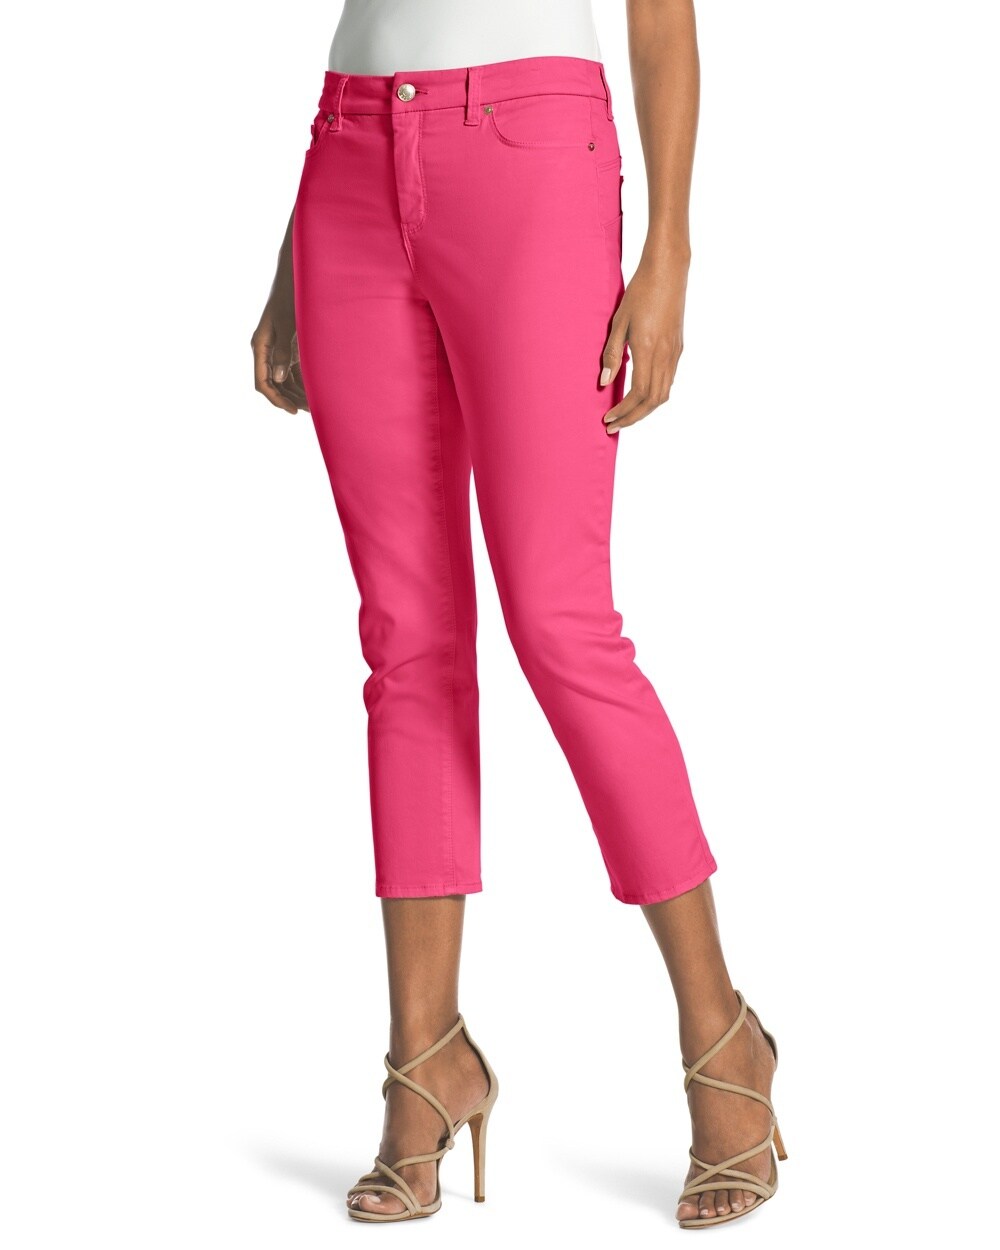 So Lifting Crop Jeans in Raspberry